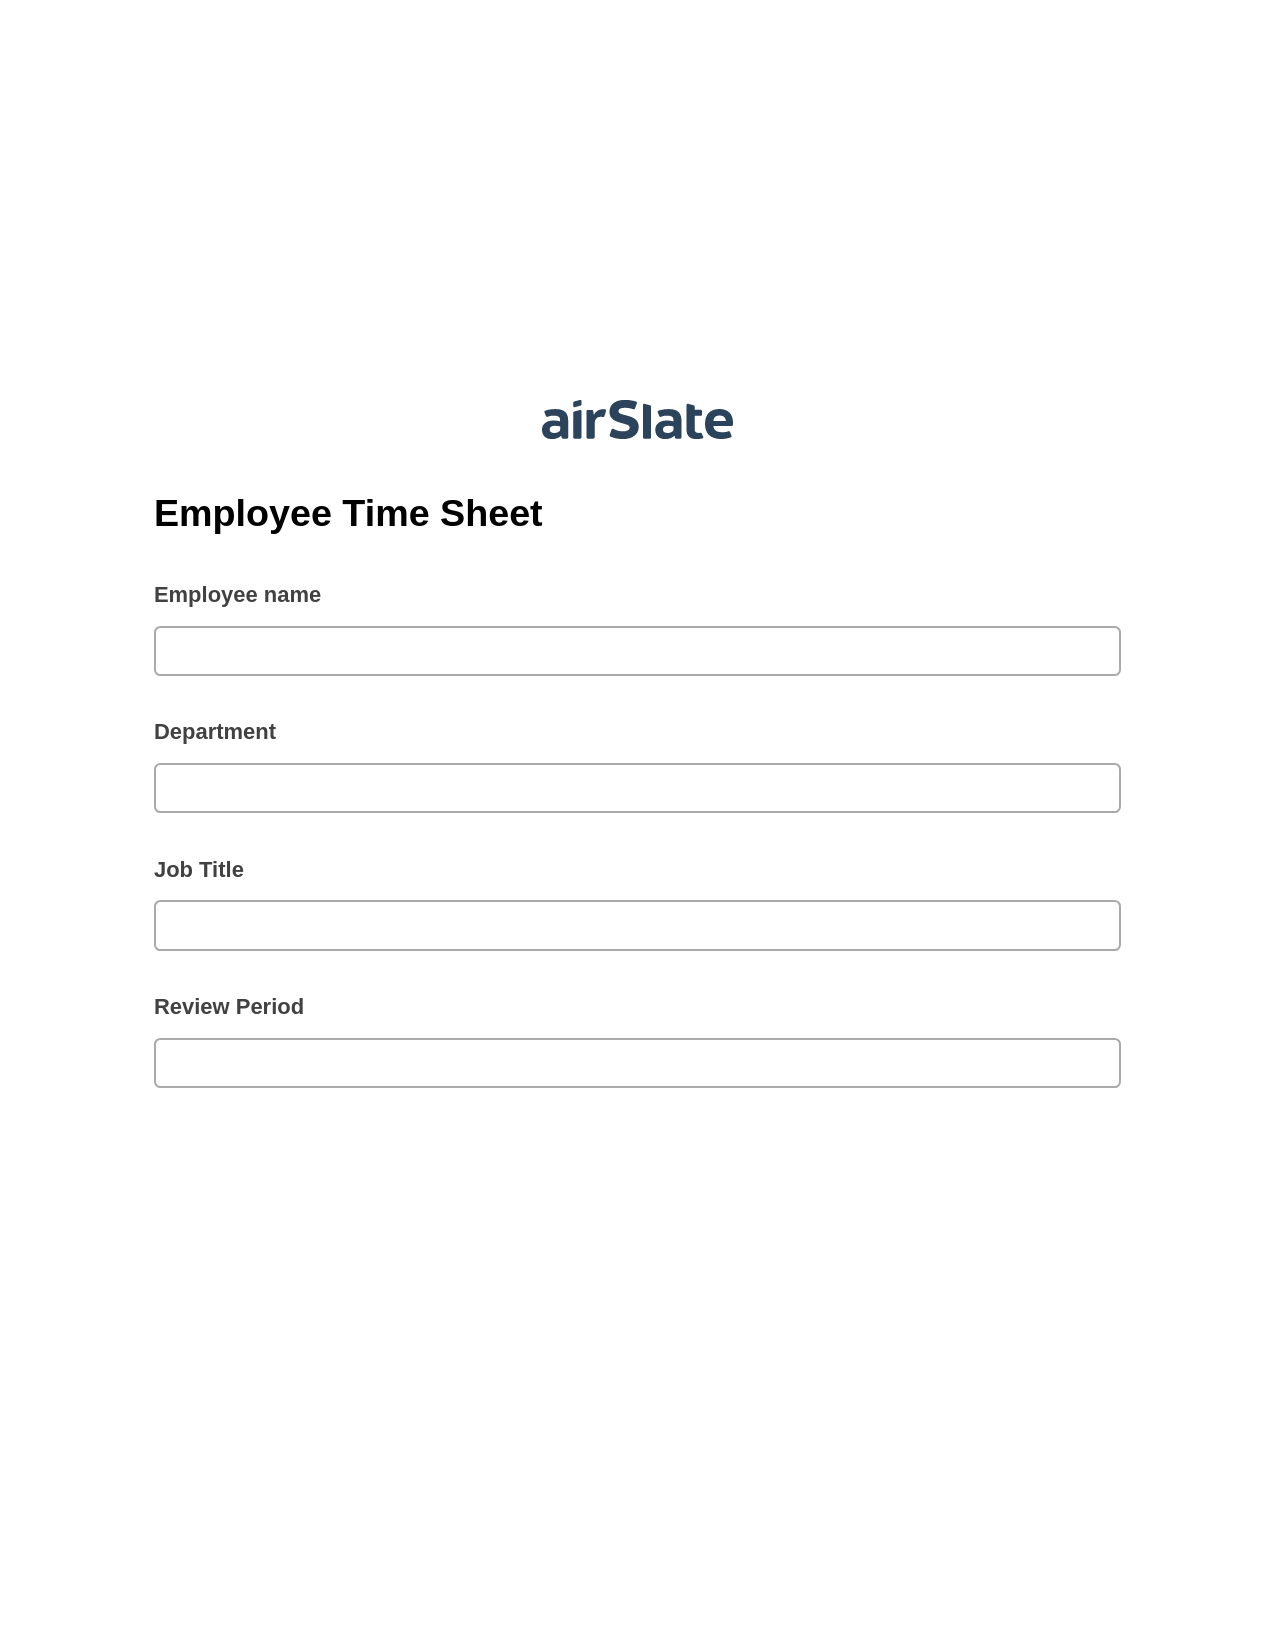 Employee Time Sheet Prefill from NetSuite records, Update Audit Trail Bot, Email Notification Postfinish Bot